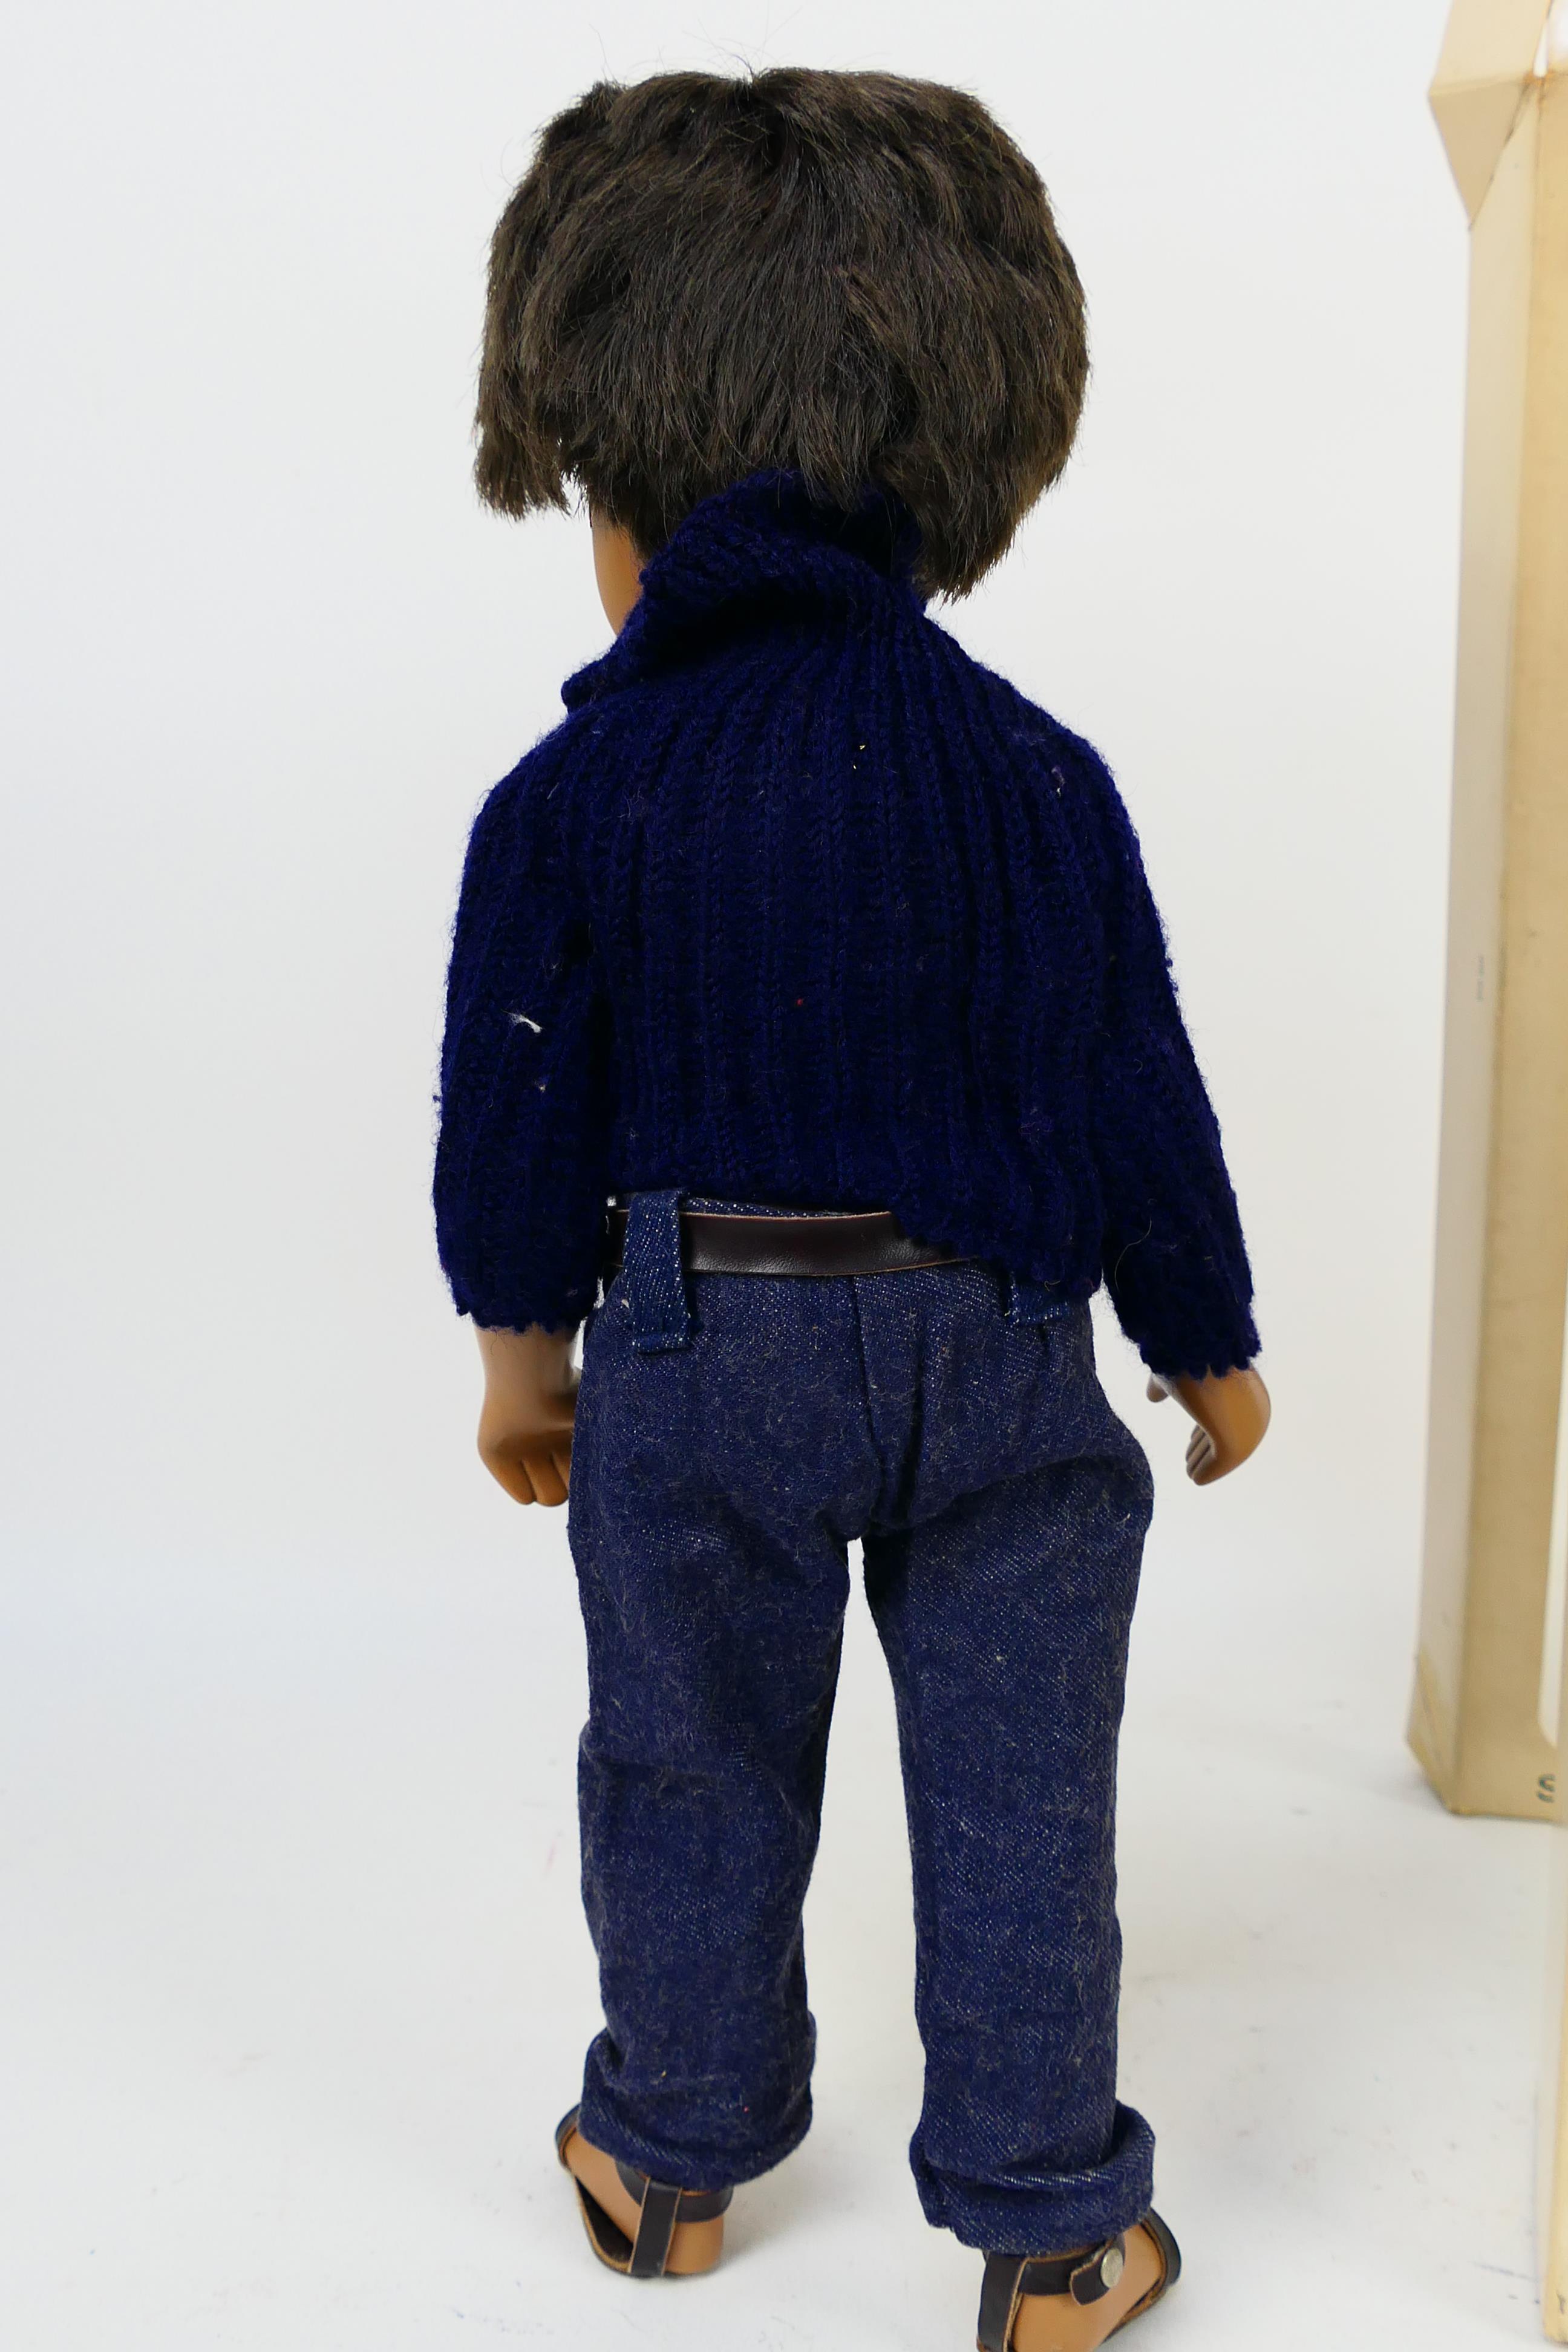 Trendon - Sasha Doll - A boxed Gregor Doll with dark hair and denims # D342. - Image 5 of 5